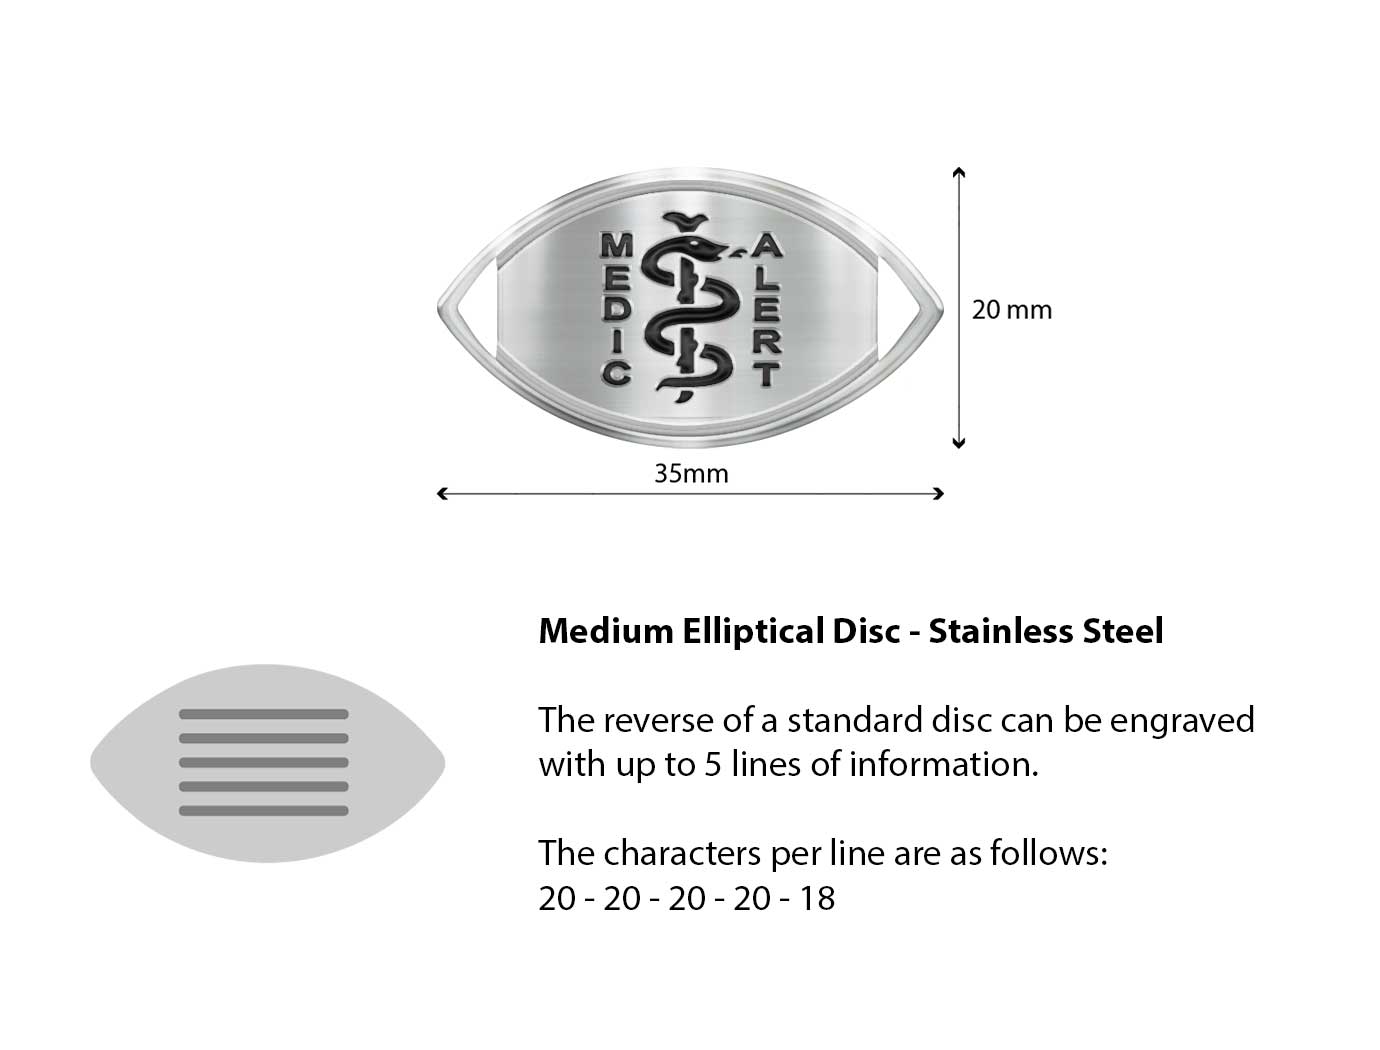 Diagram of the MedicAlert stainless steel medium elliptical disc with measurements and descriptions of the engraving specifications